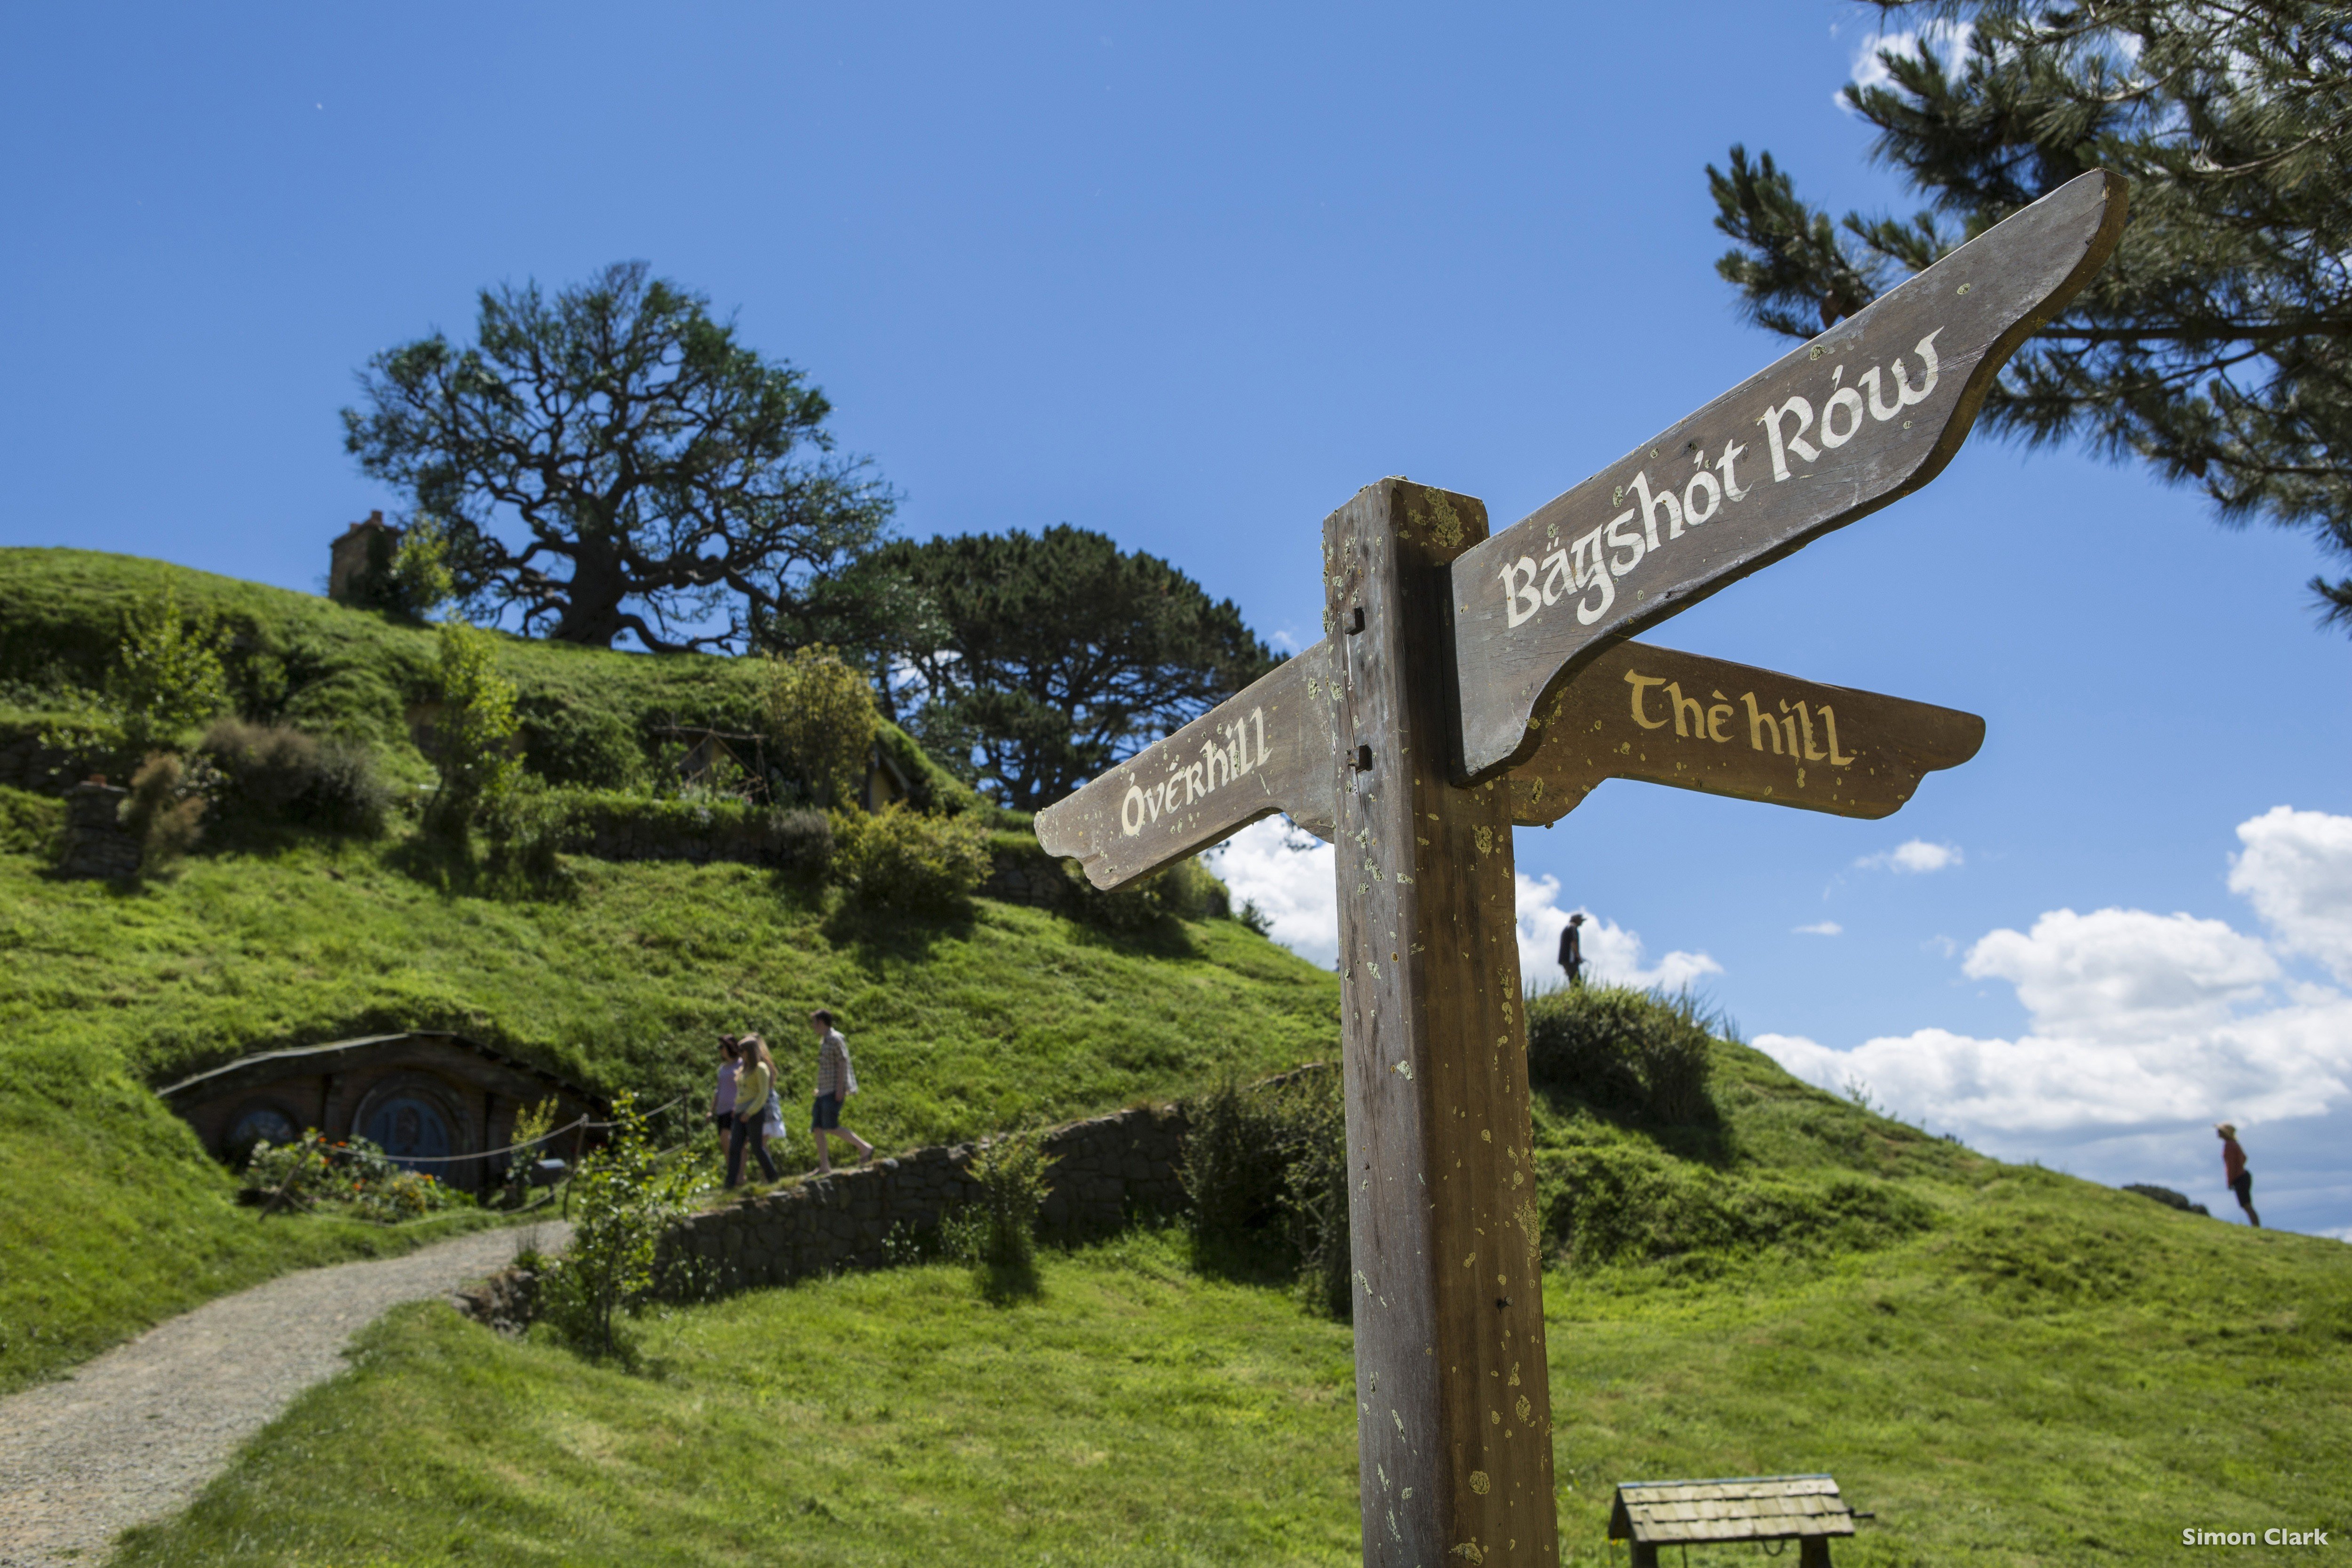 Digital-savvy Chinese tourists have flocked to New Zealand to see sights that include a 1,250 acre sheep farm that became Hobbiton, the home of the hobbits in JRR Tolkien’s fantasy land Middle Earth